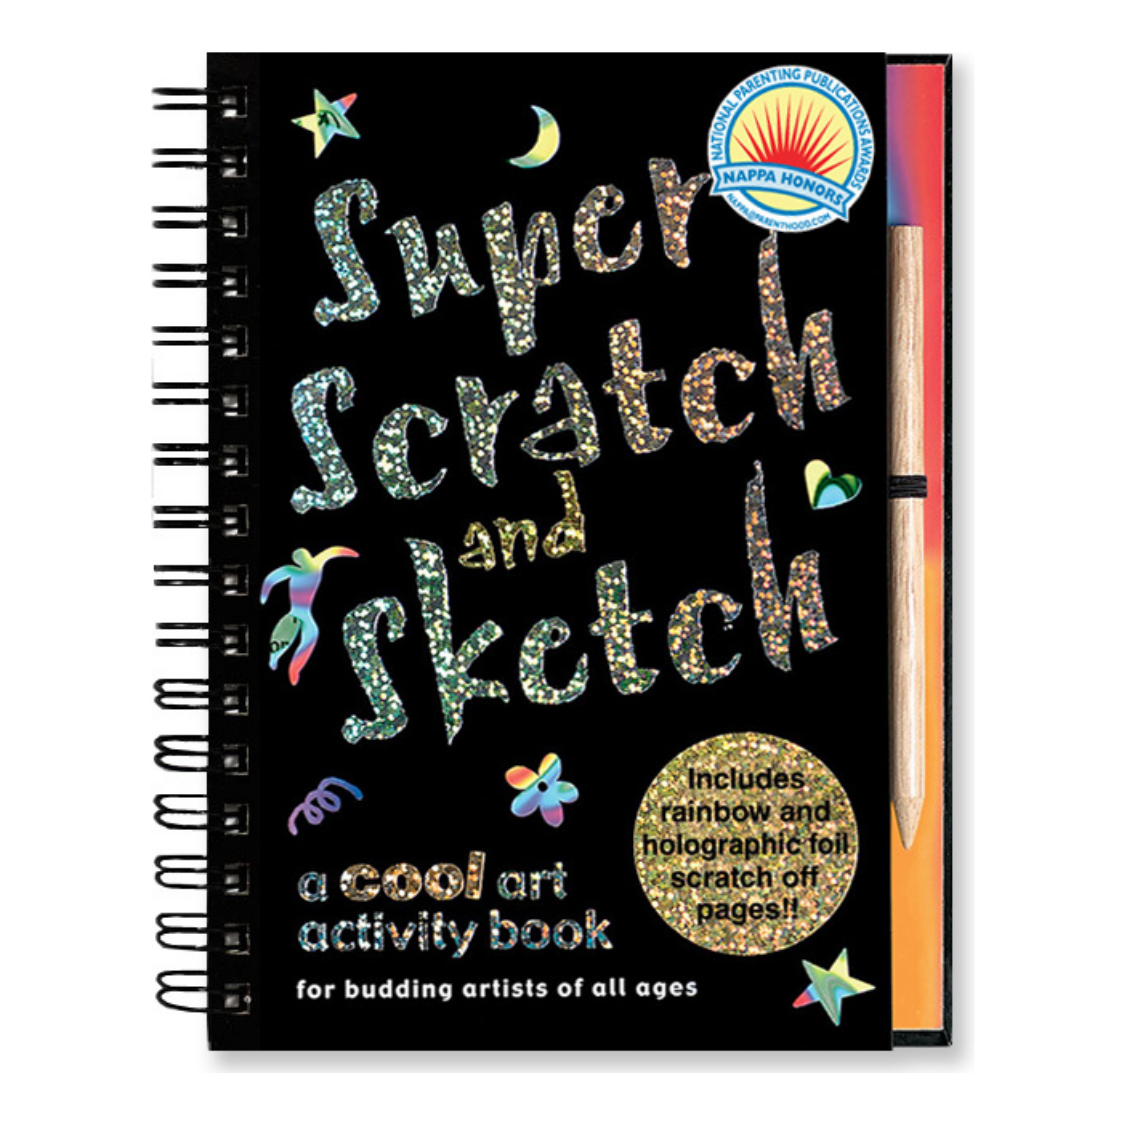 Scratch And Sketch Activity Book (Multiple Styles)